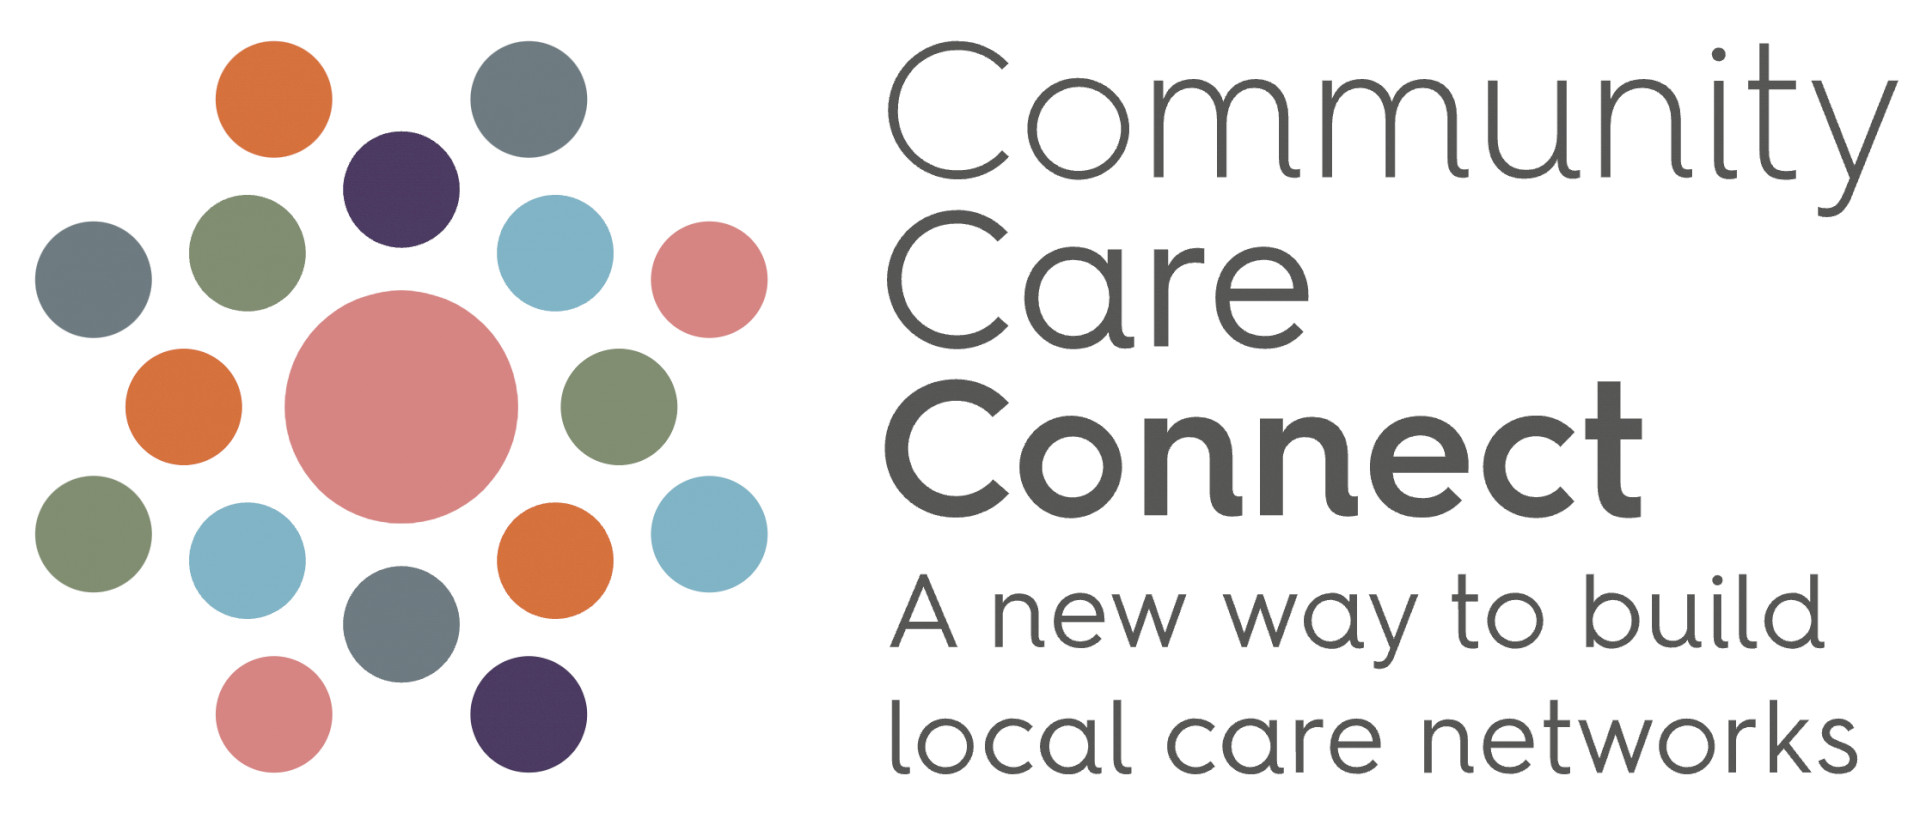 Community Care Connect